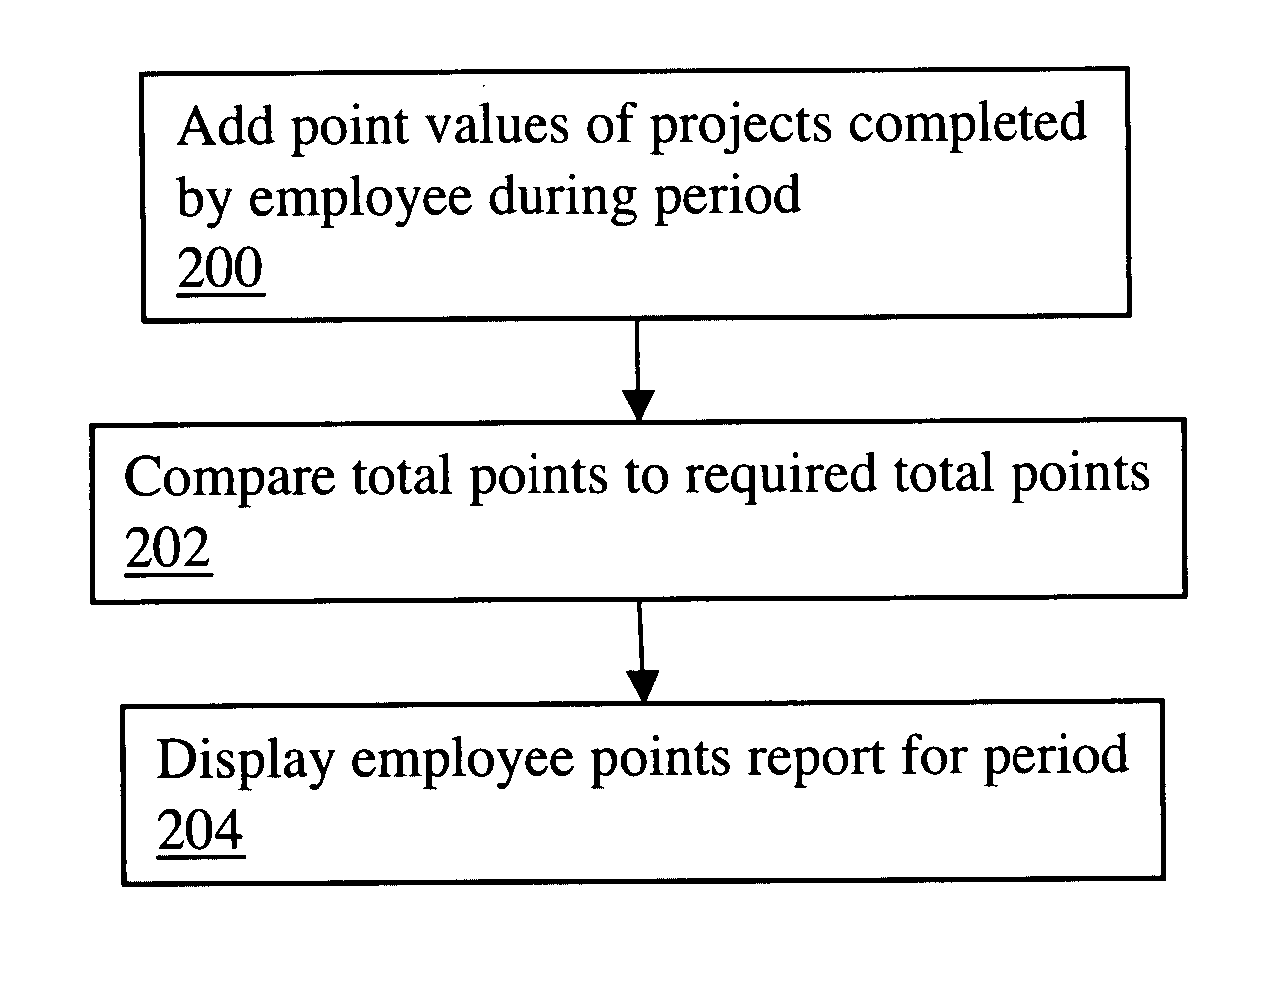 Professional service management using project-based point system